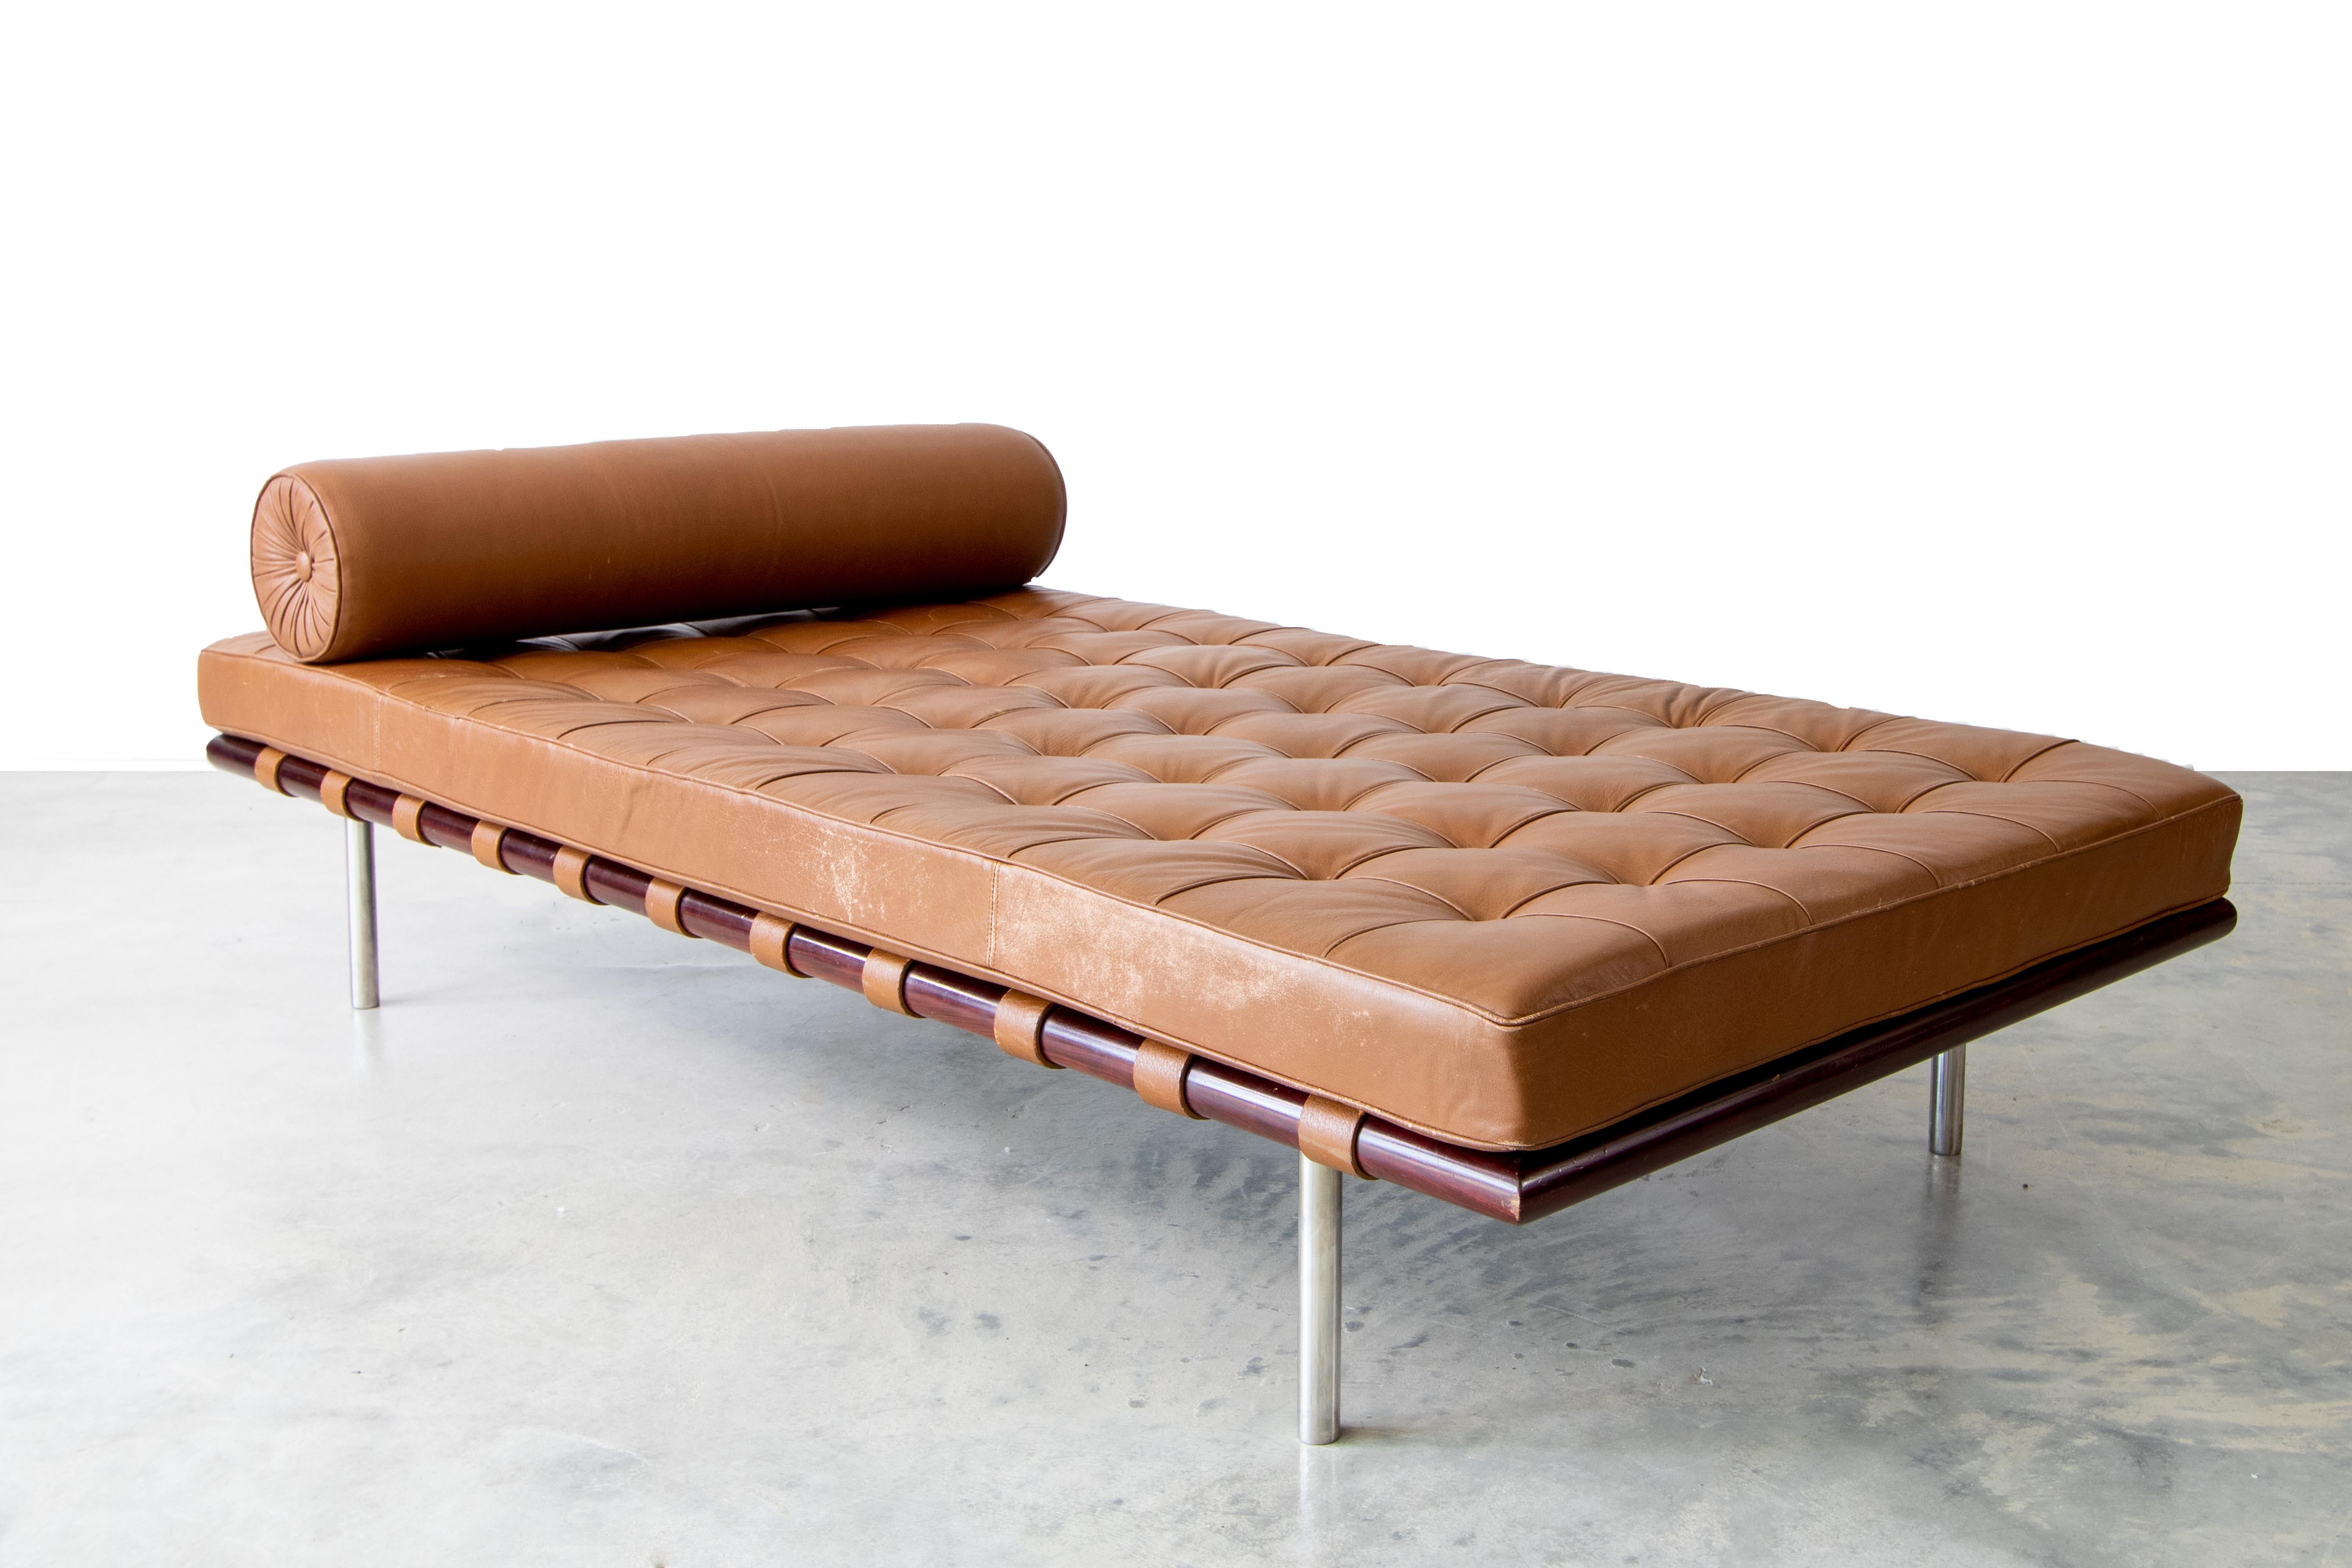 A great example of the timeless Barcelona couch Daybed designed by Ludwig Mies van der Rohe for Knoll and produced in the 1970s . This example with rosewood frame and the original tan leather. The cushion and the frame both retain their original